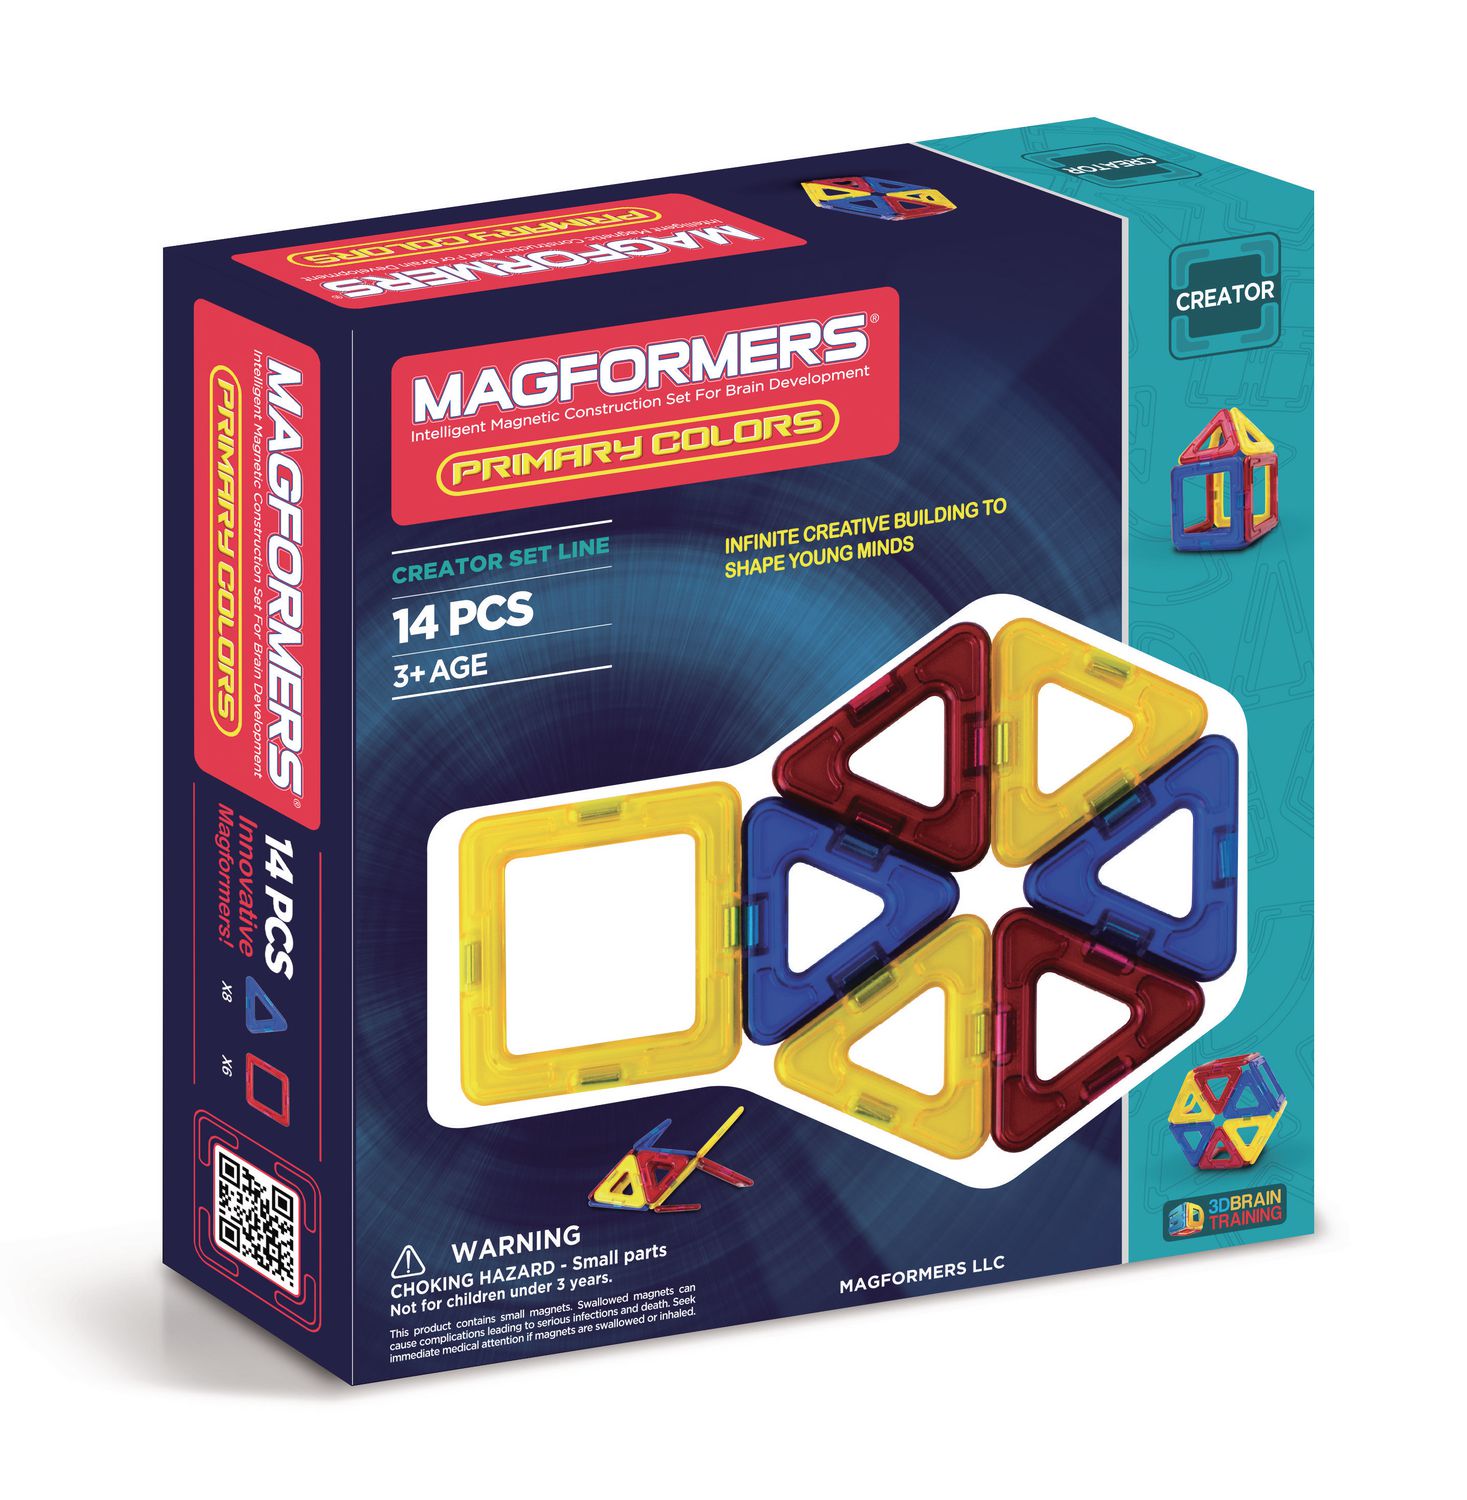 Magformers Primary Colors 14 Piece Construction Toy Set - Walmart.ca